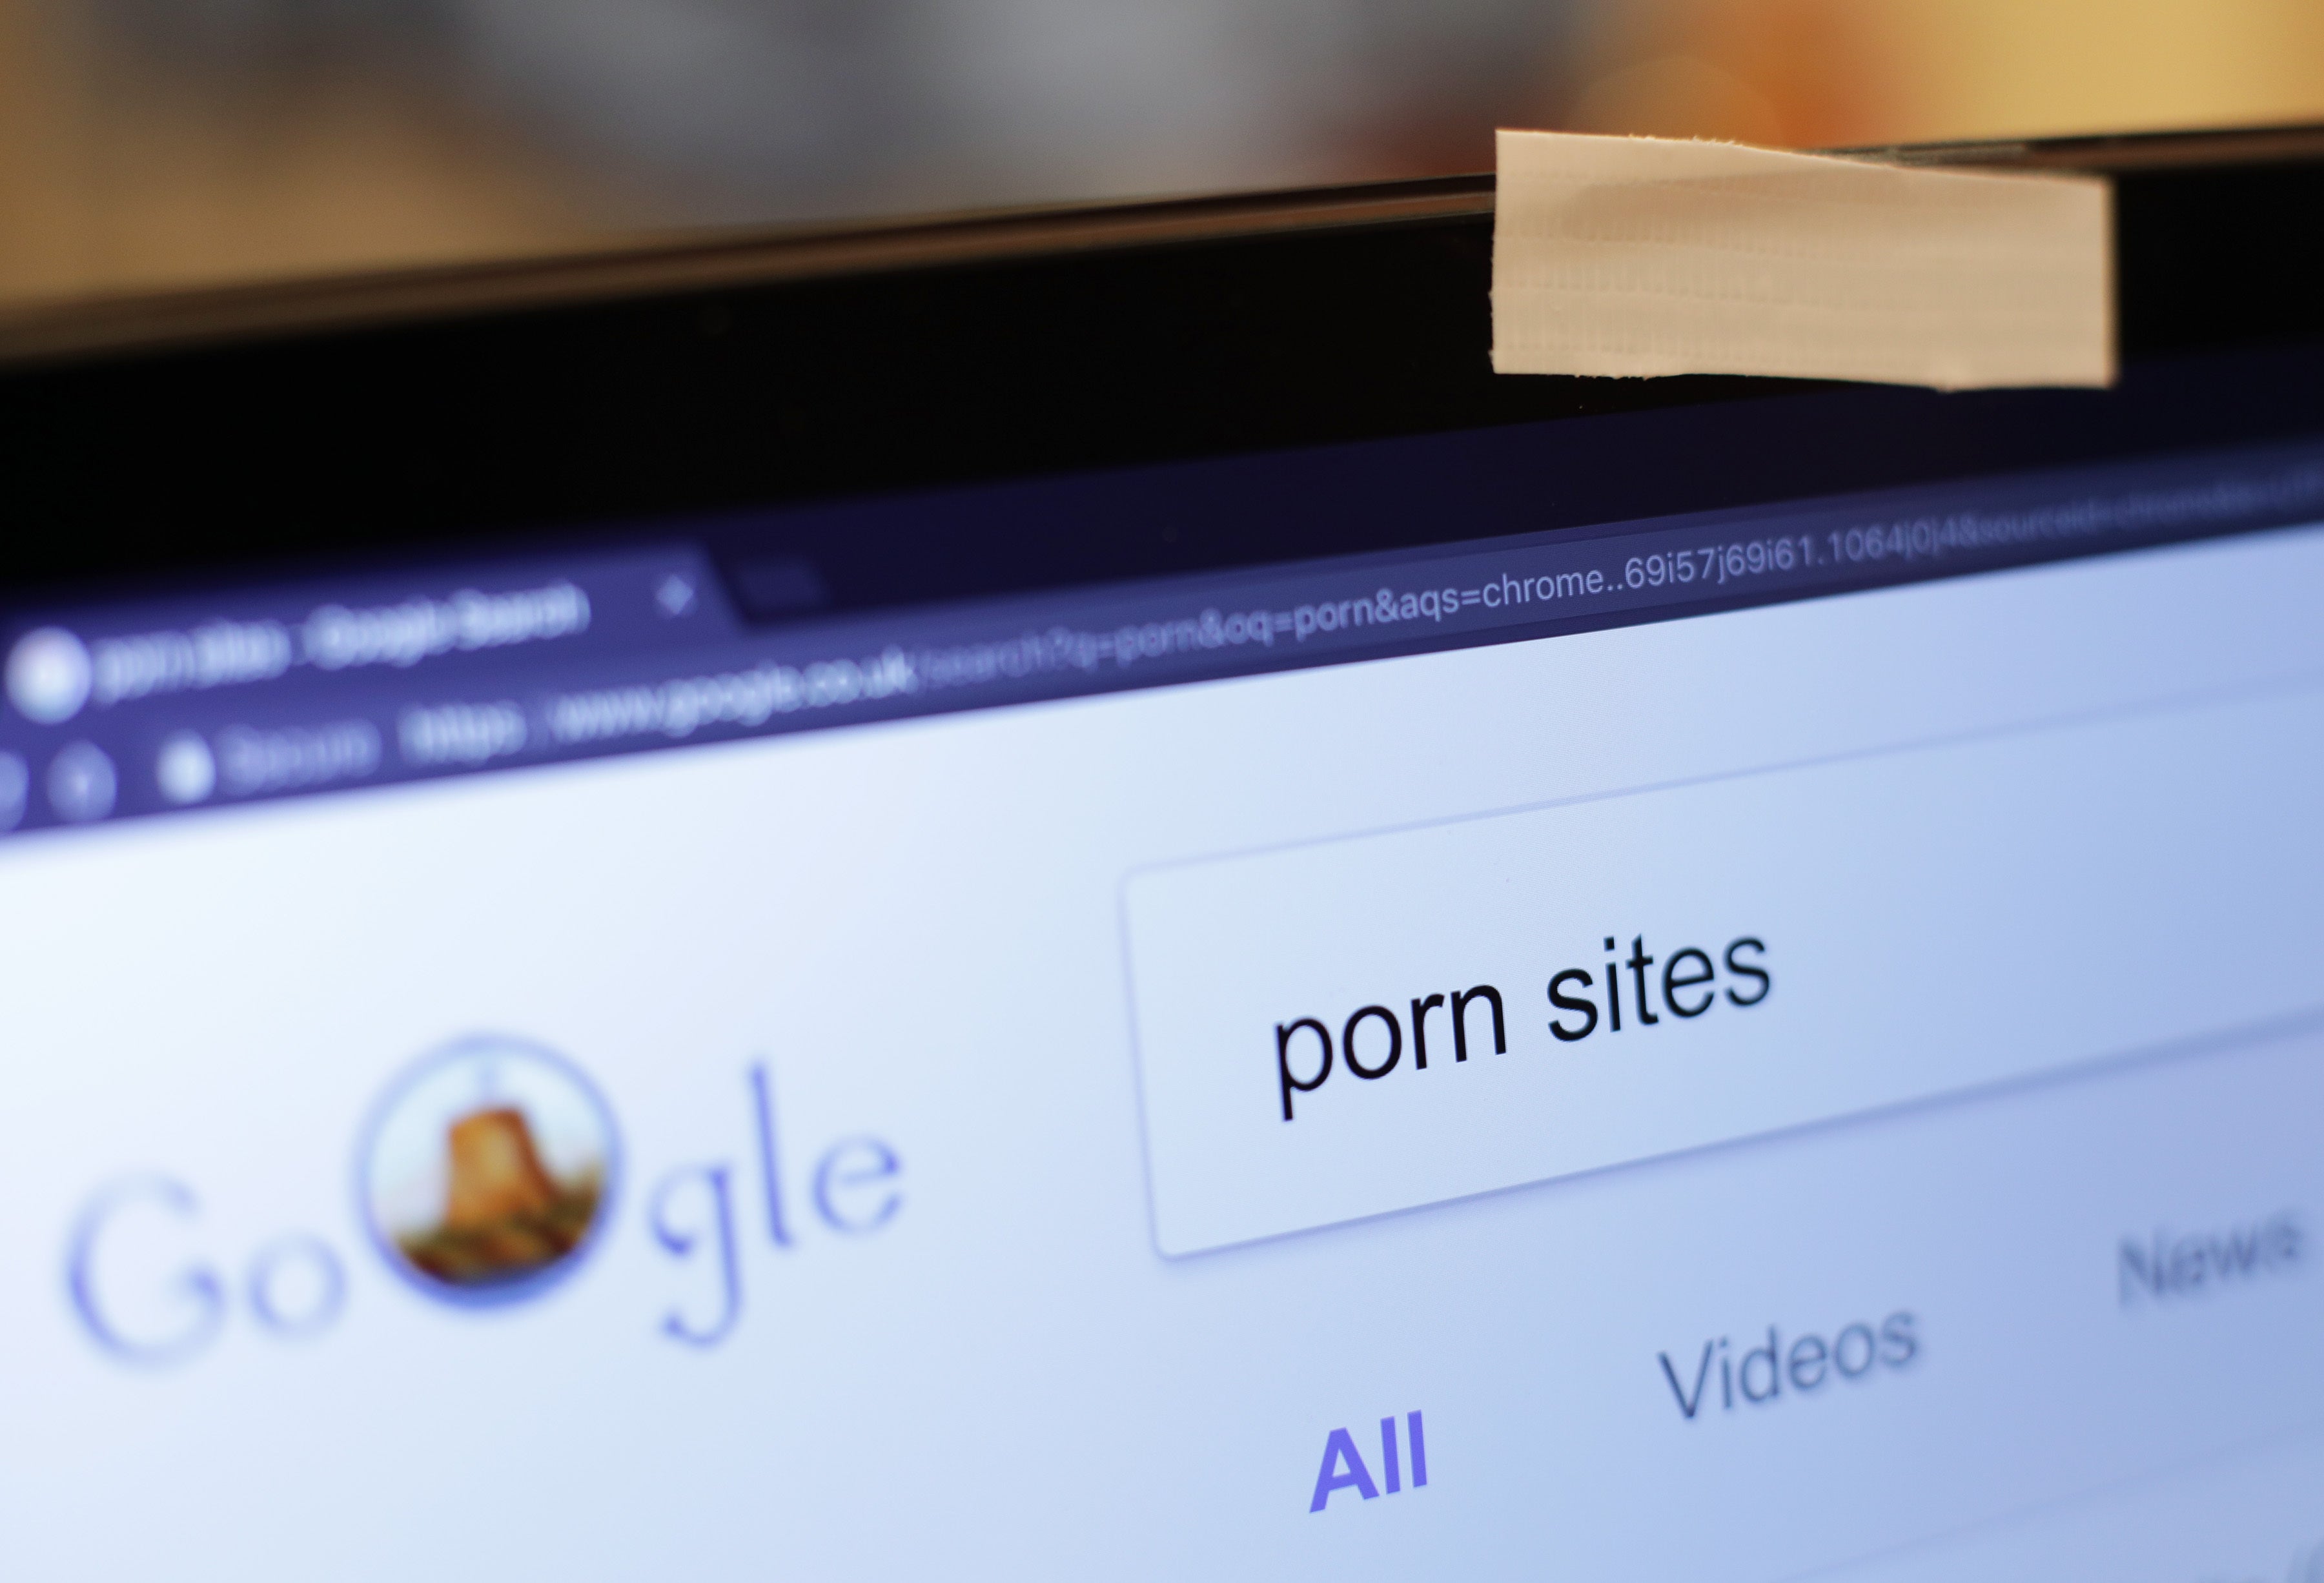 Do Women View Porn - Pornography may damage men's view of women less than previously thought â€“  study | The Independent